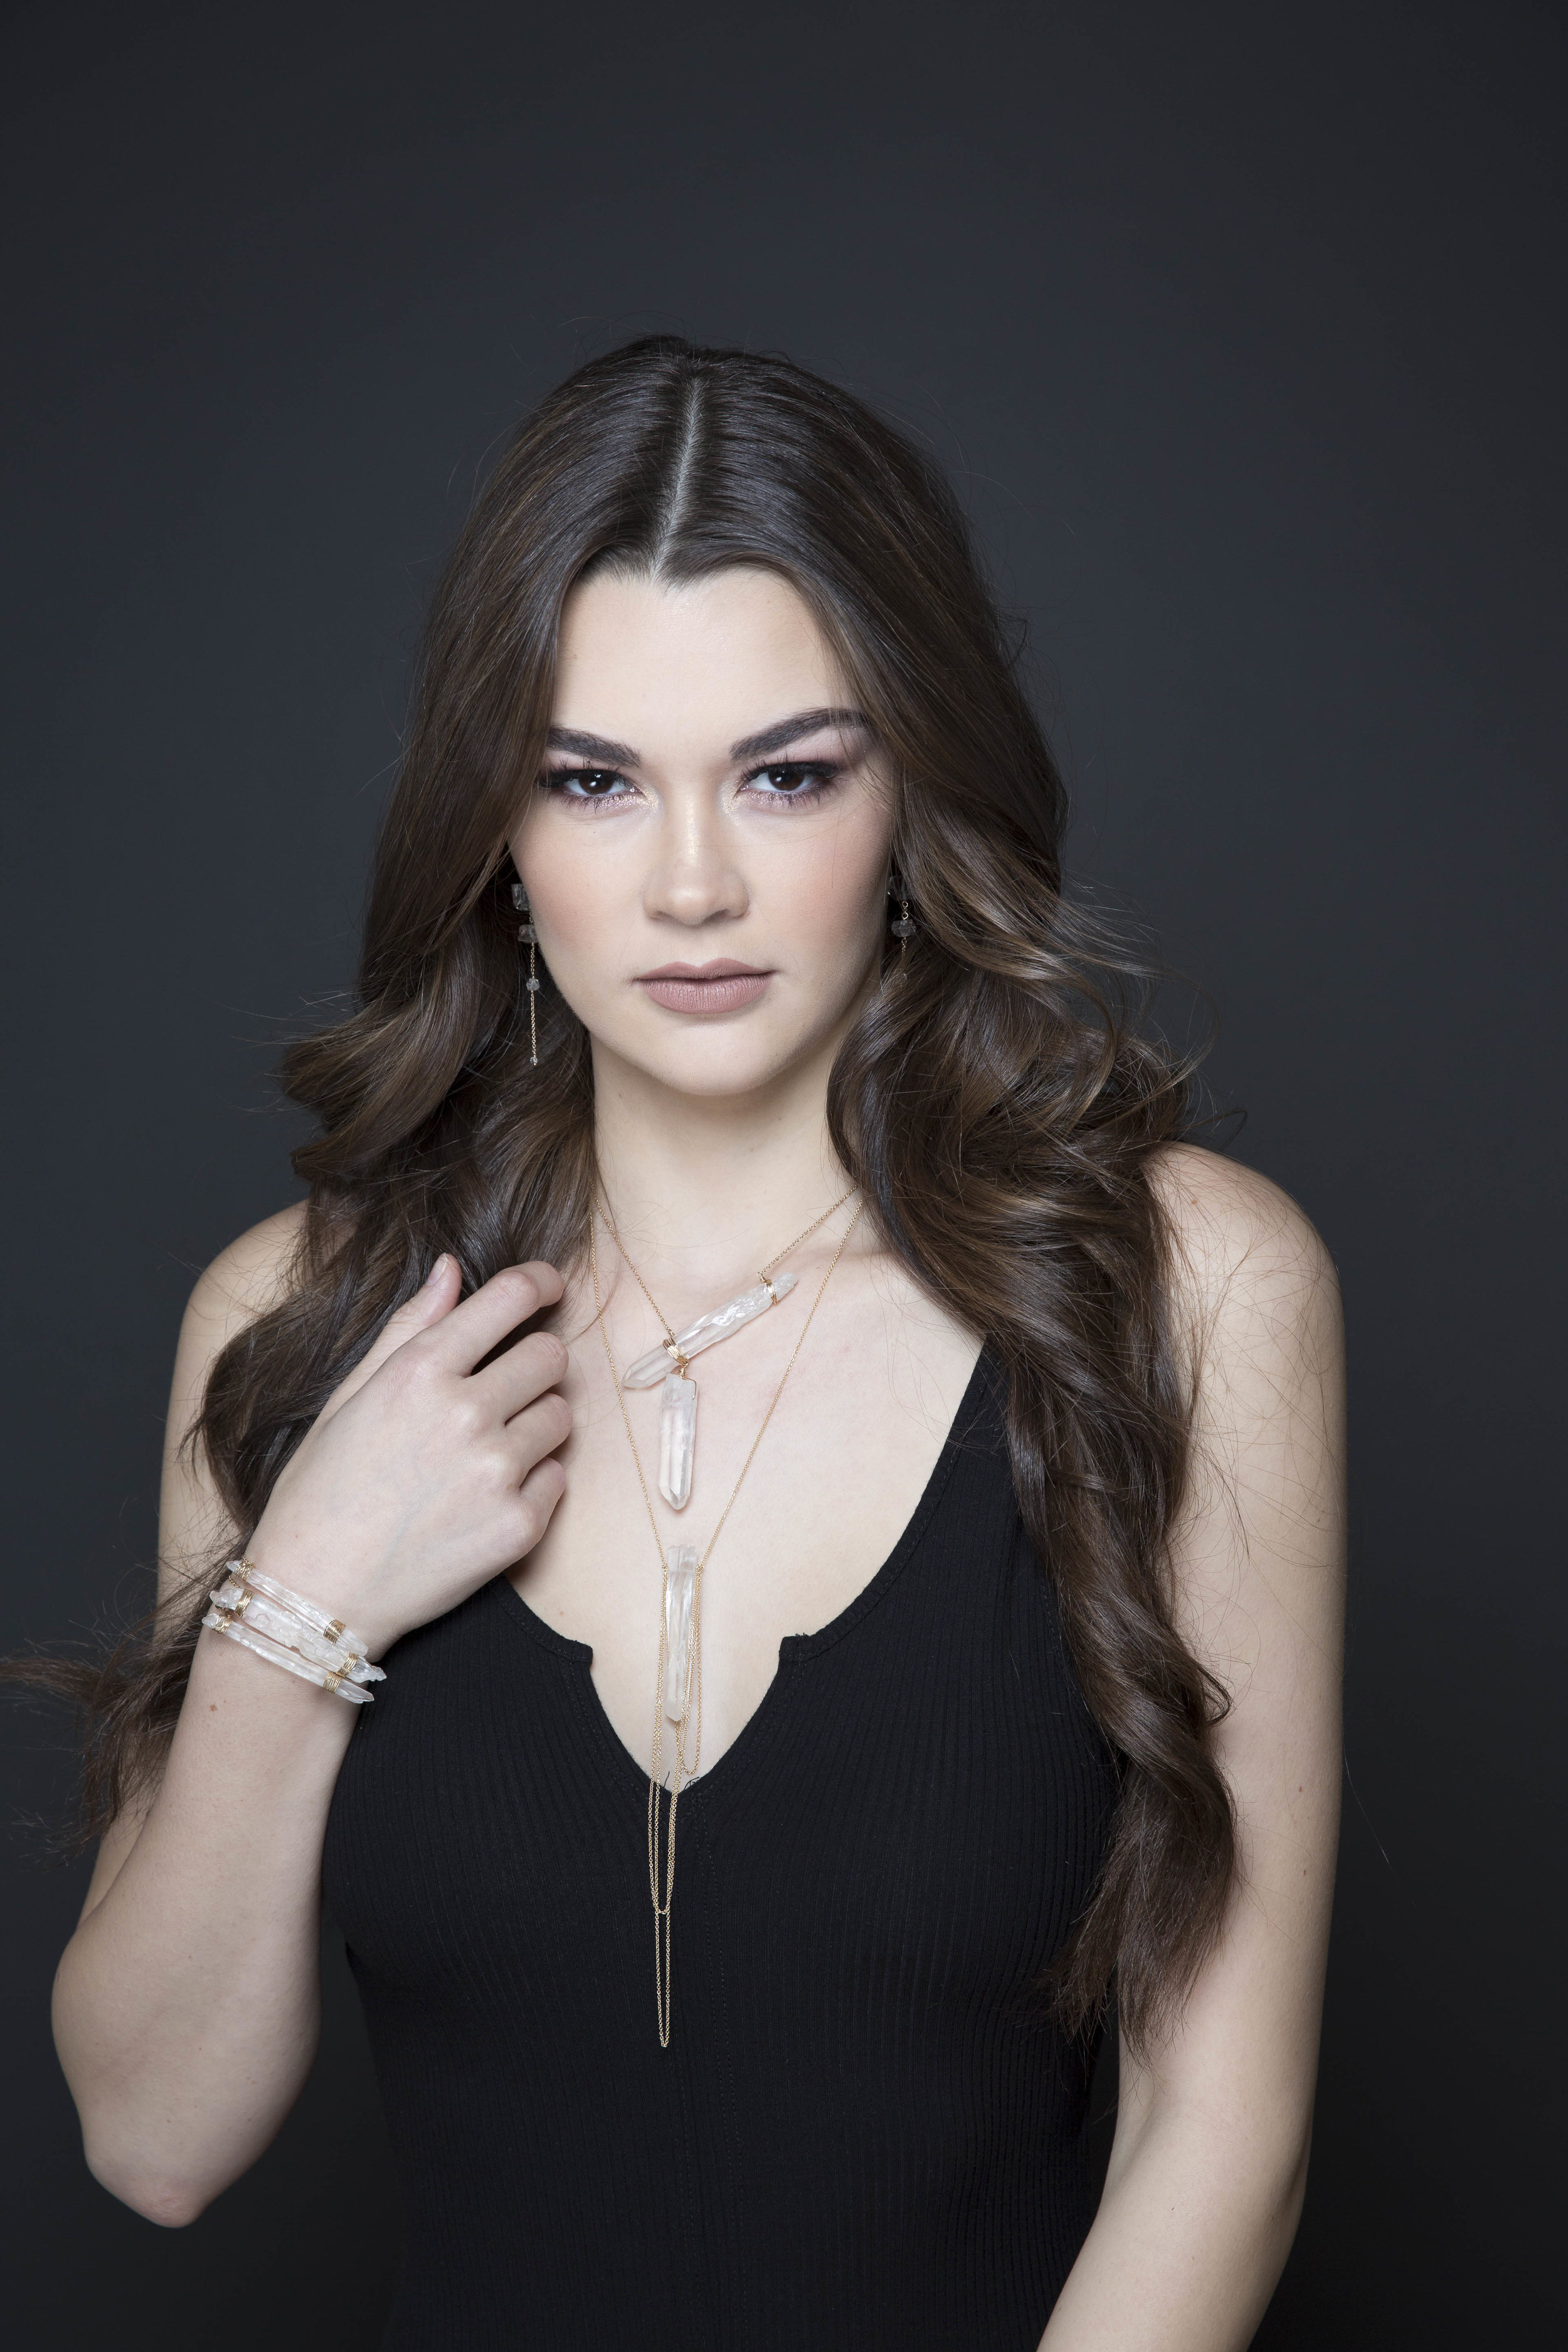 model wearing a crystal point pendant with draping gold chains necklace